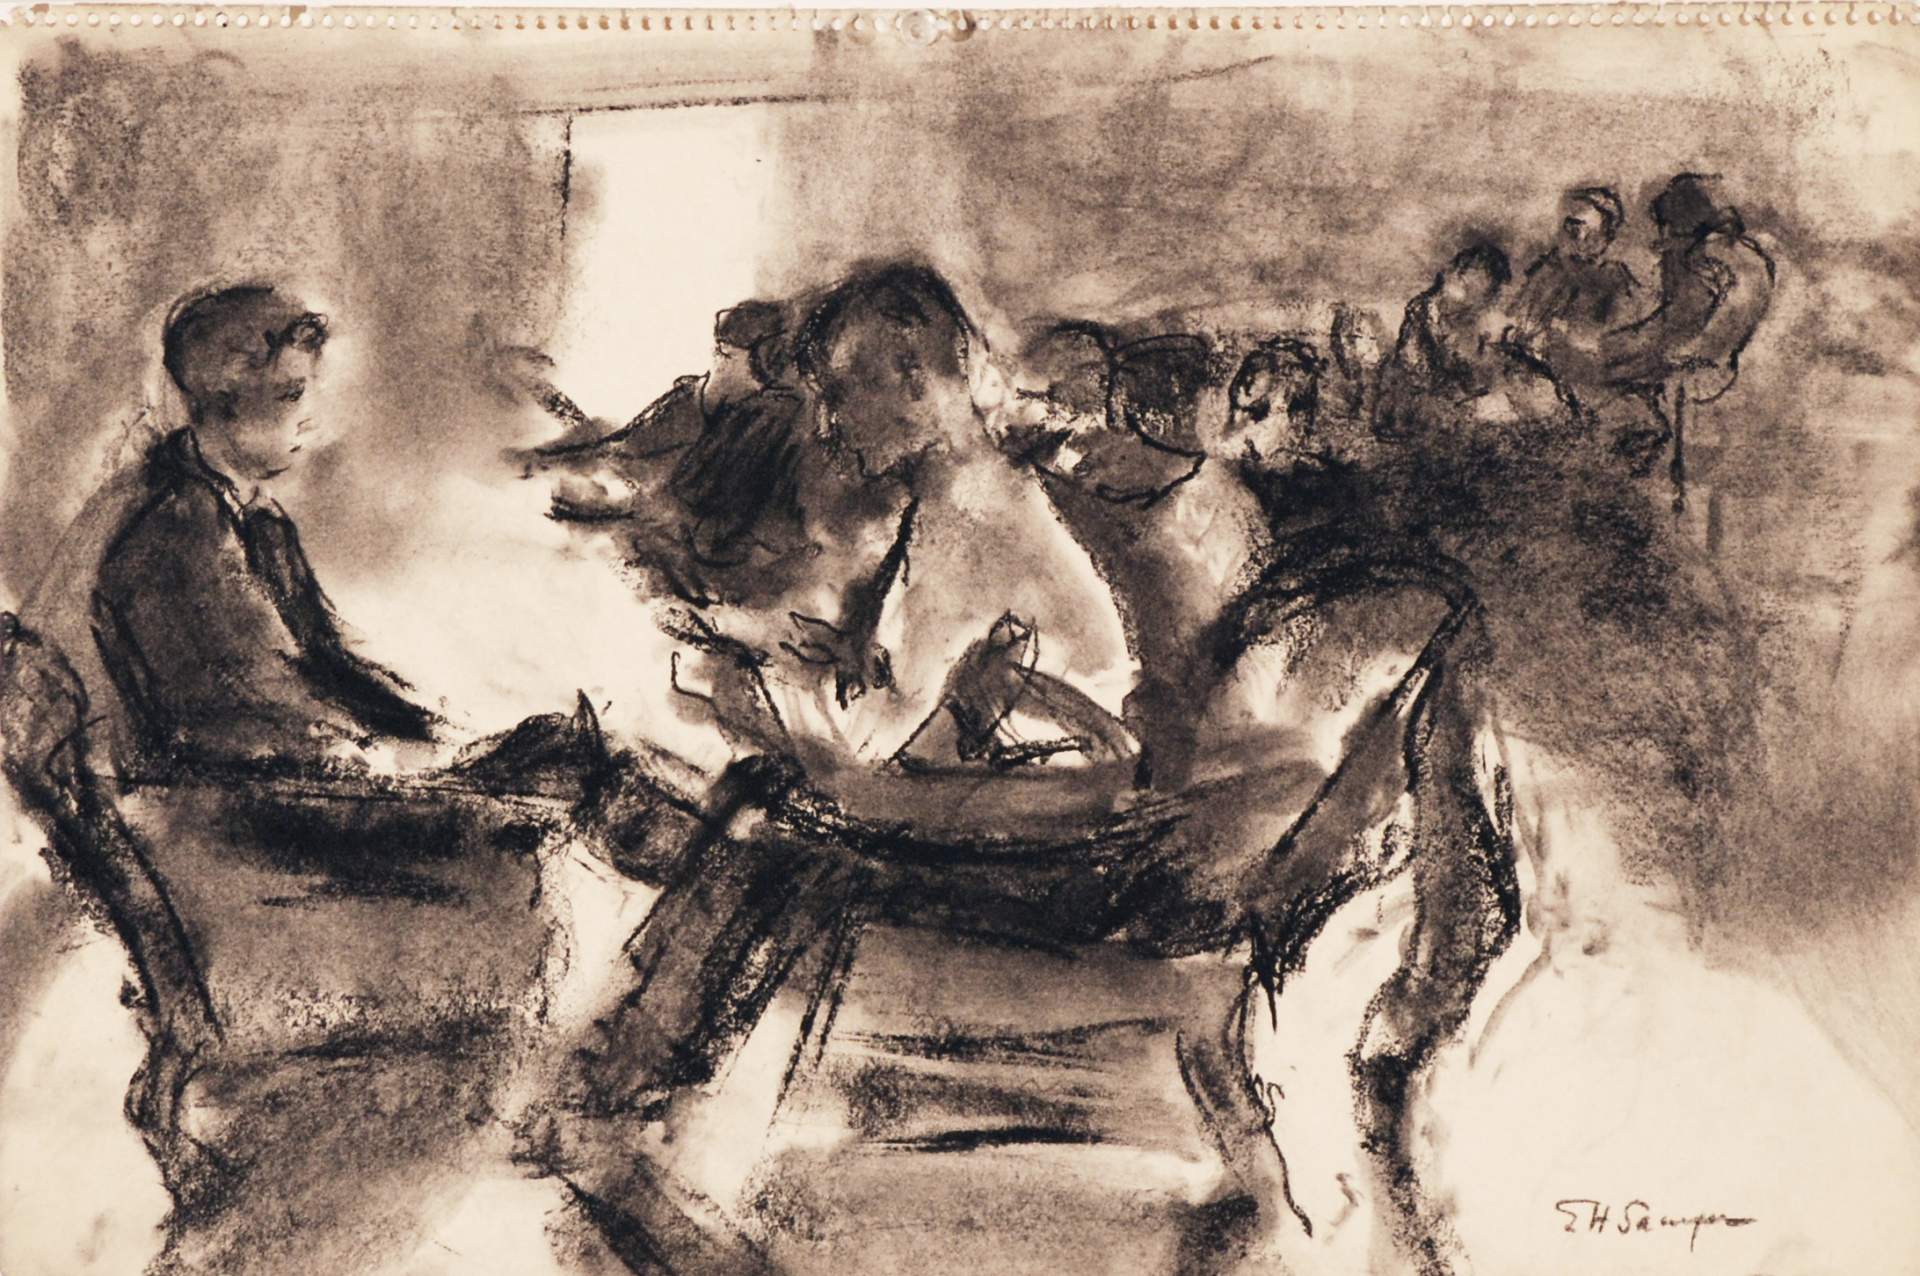 Untitled [group of seated figures]